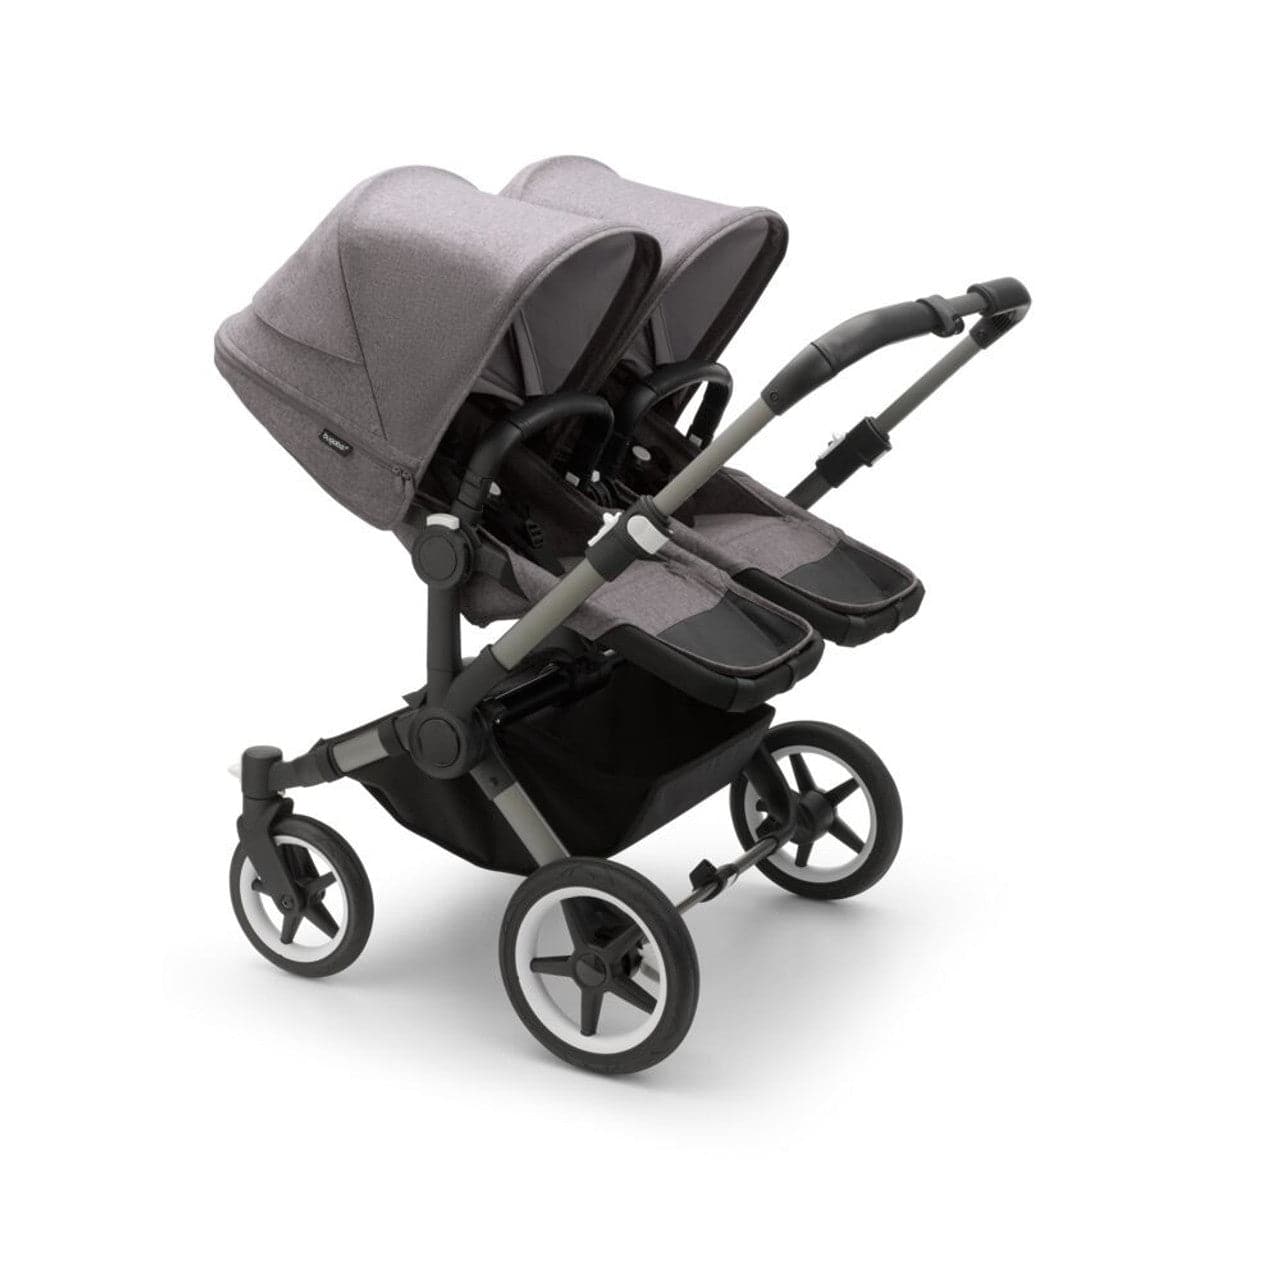 Bugaboo Donkey 5 Twin Complete Travel System + Turtle Air - Graphite/Grey Melange - For Your Little One